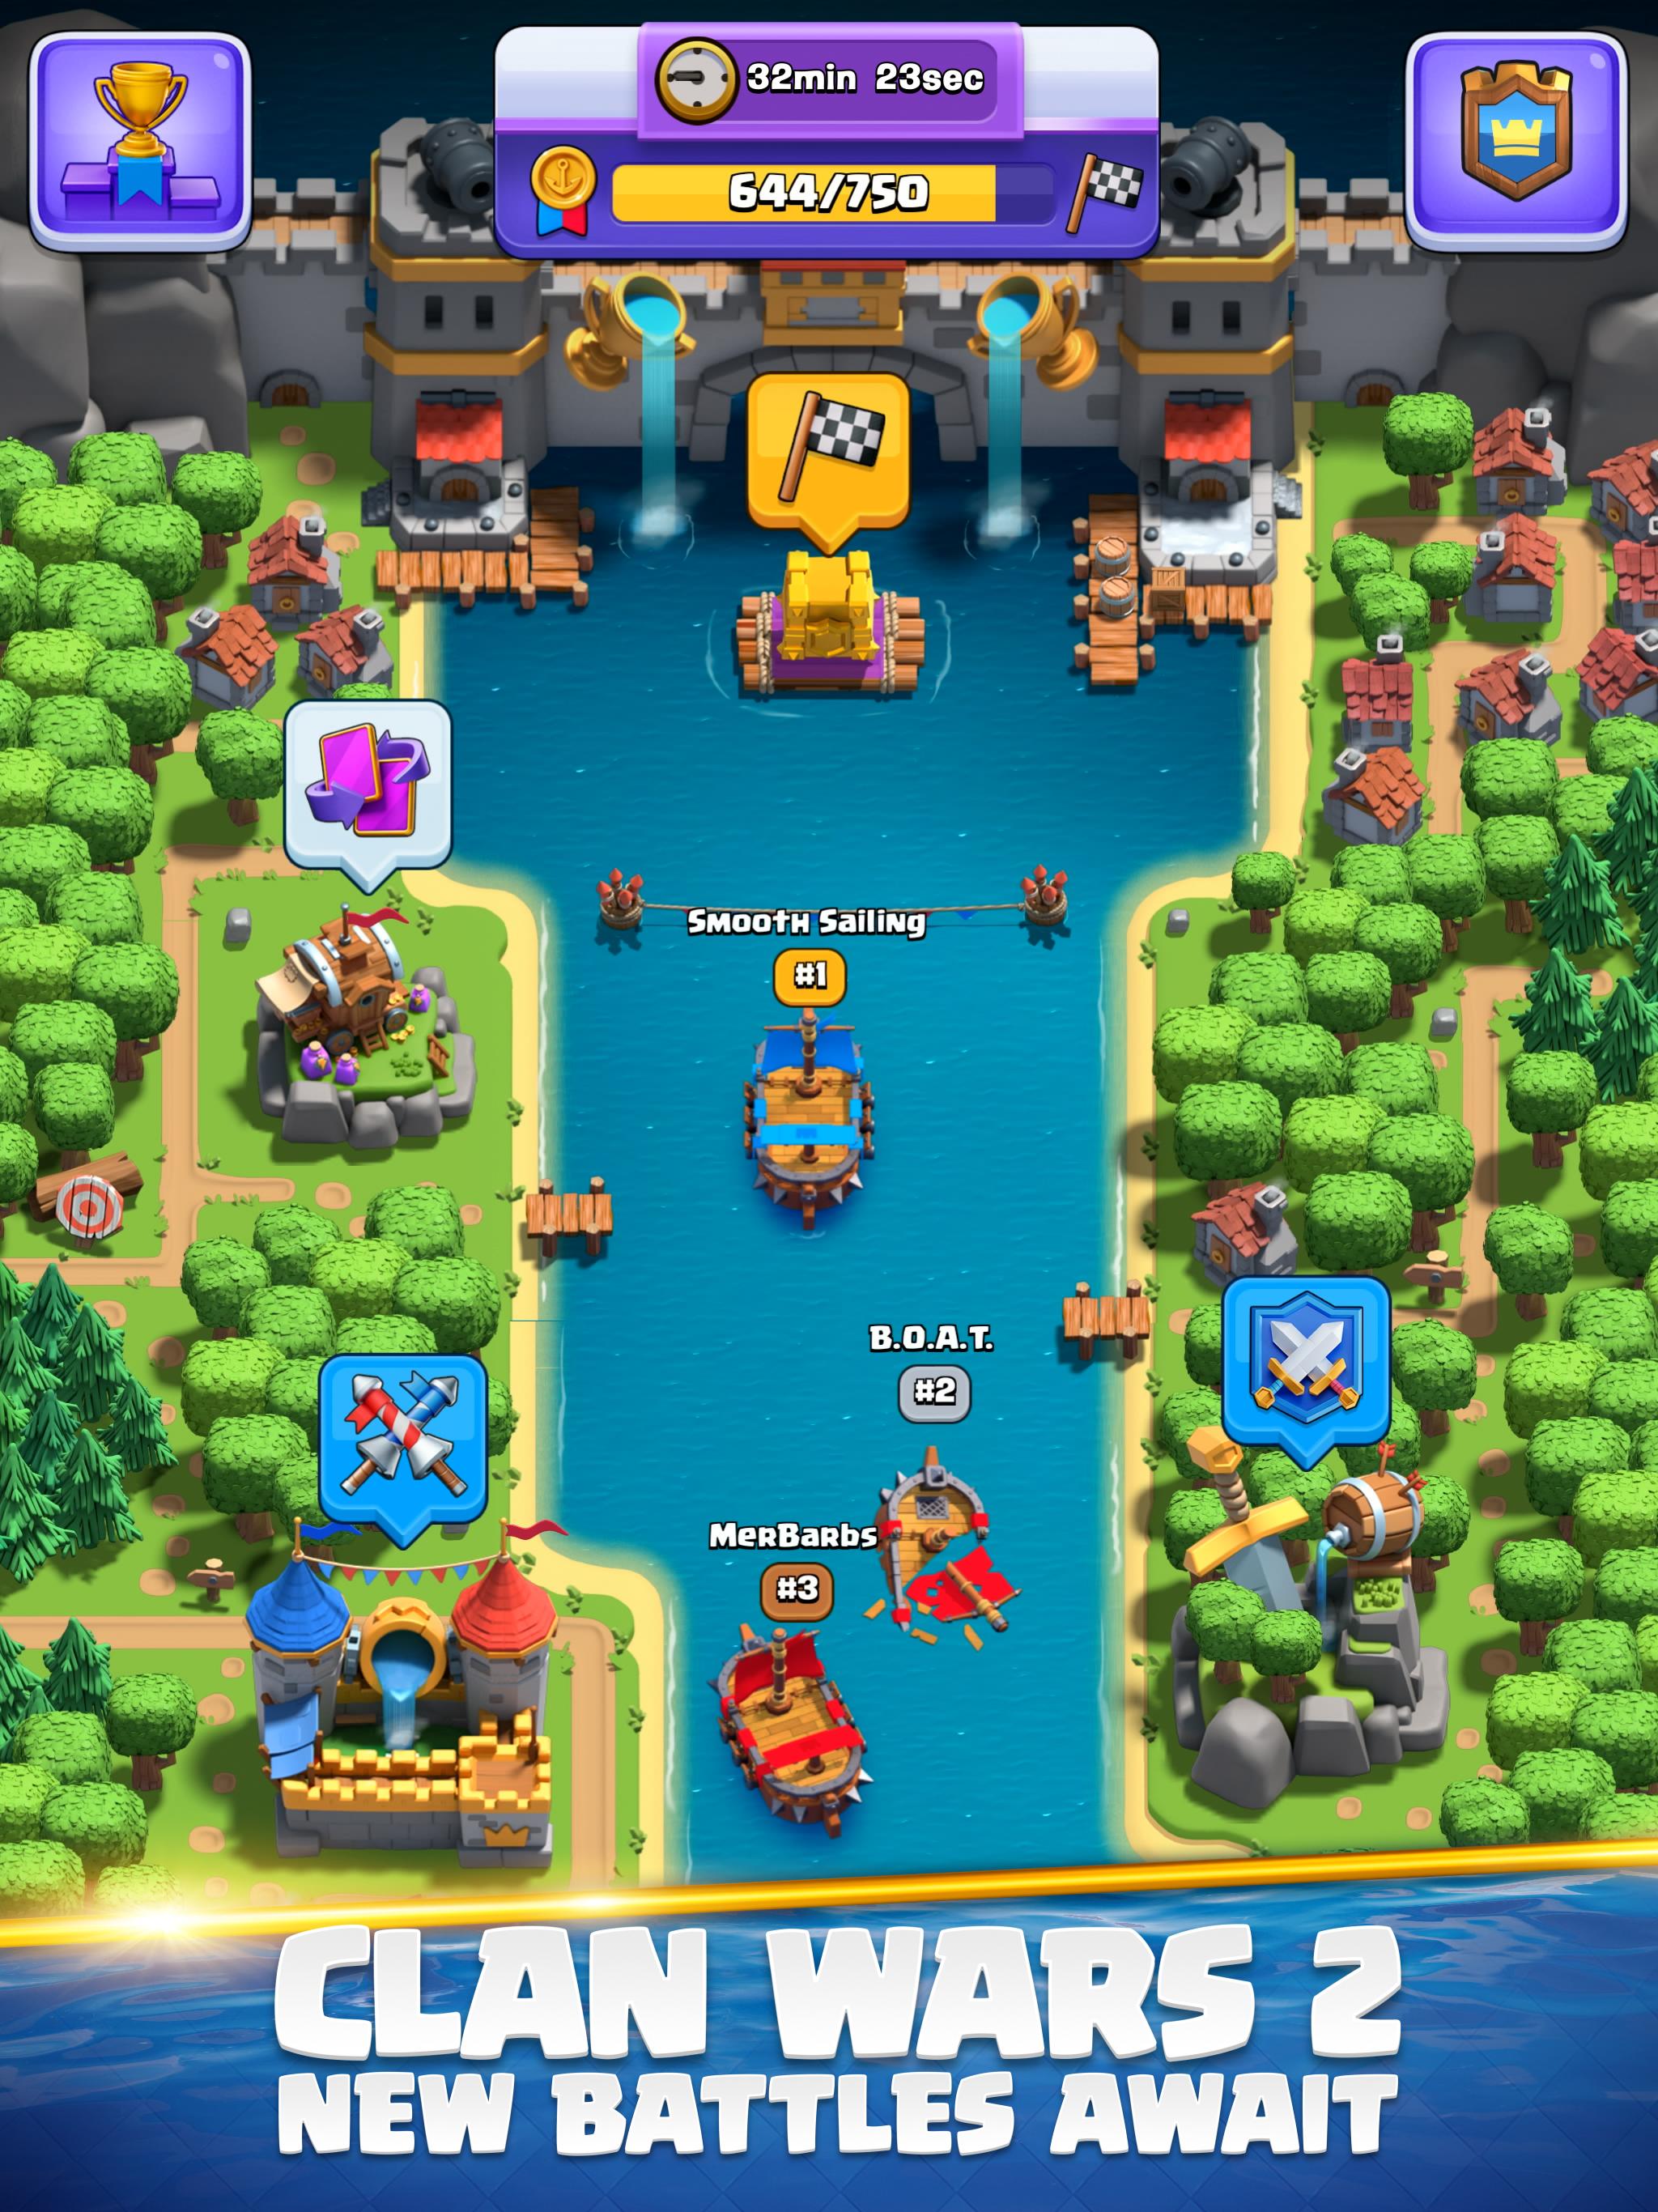 Clash Royale Real Time Strategy Card Game From Supercell Apk 3 3 2 Download And Update In Apkpure App - thomas and friends s5 crashes roblox in 2019 thomas